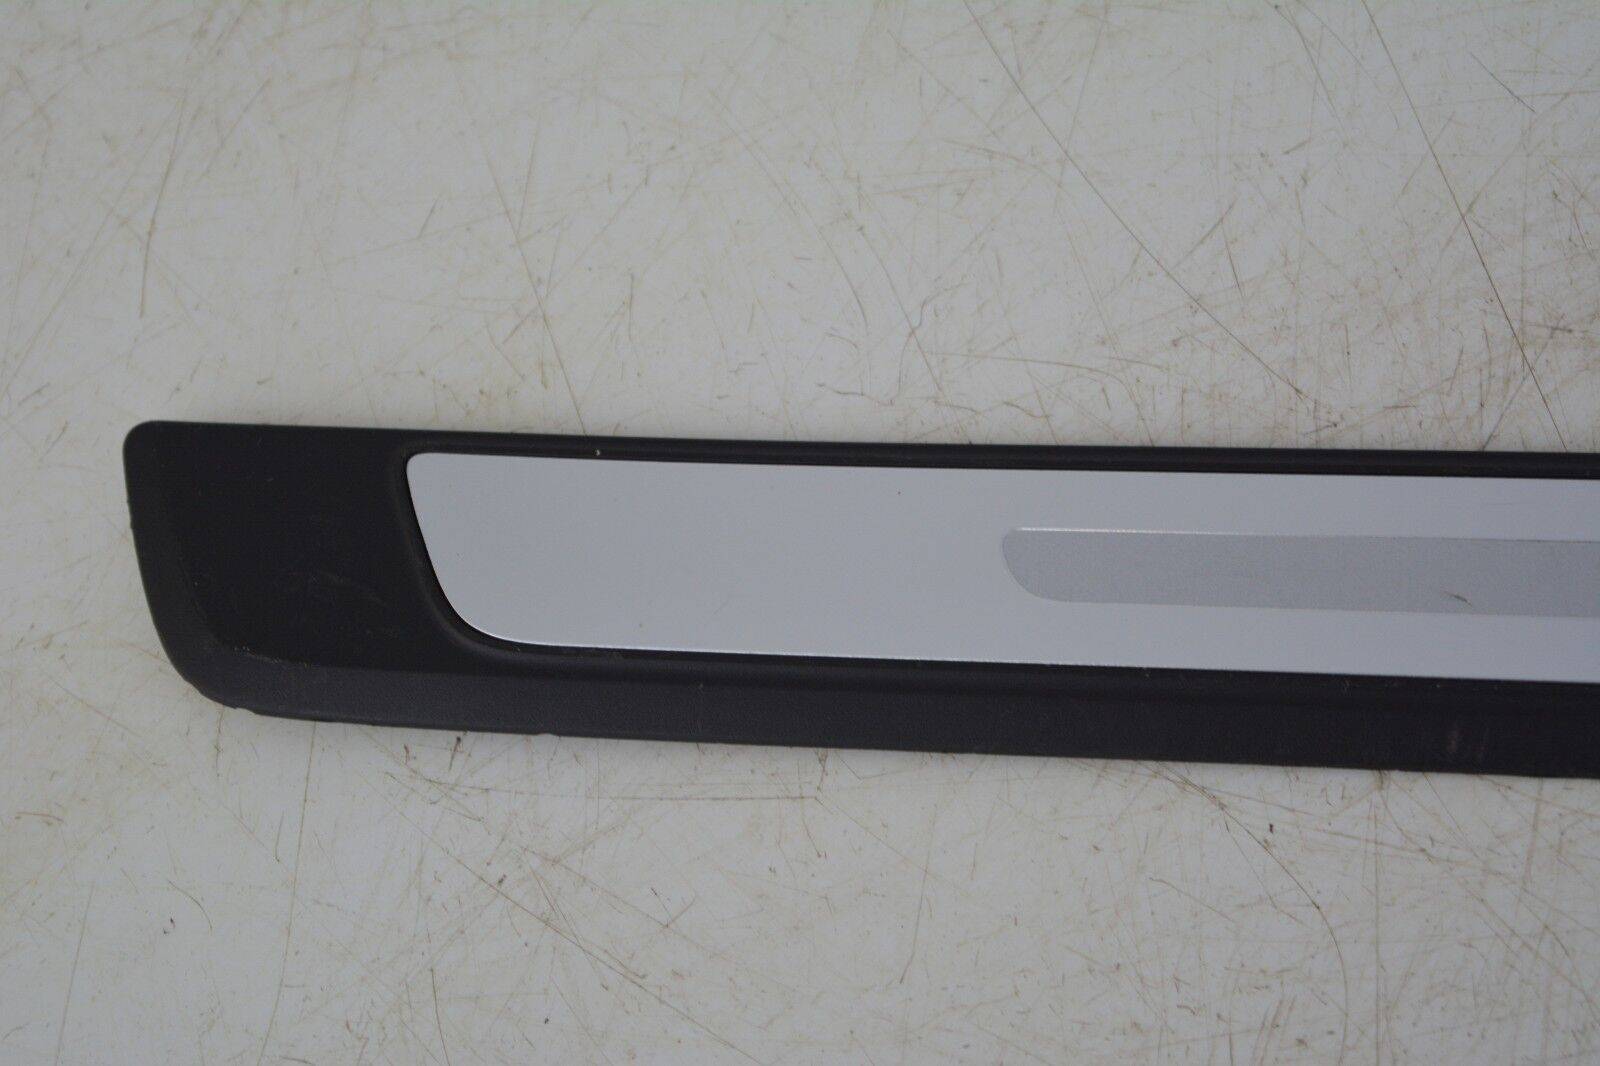 AUDI-A4-DOOR-SILL-ENTRY-TRIM-FRONT-LEFT-2015-2018-175367529874-5